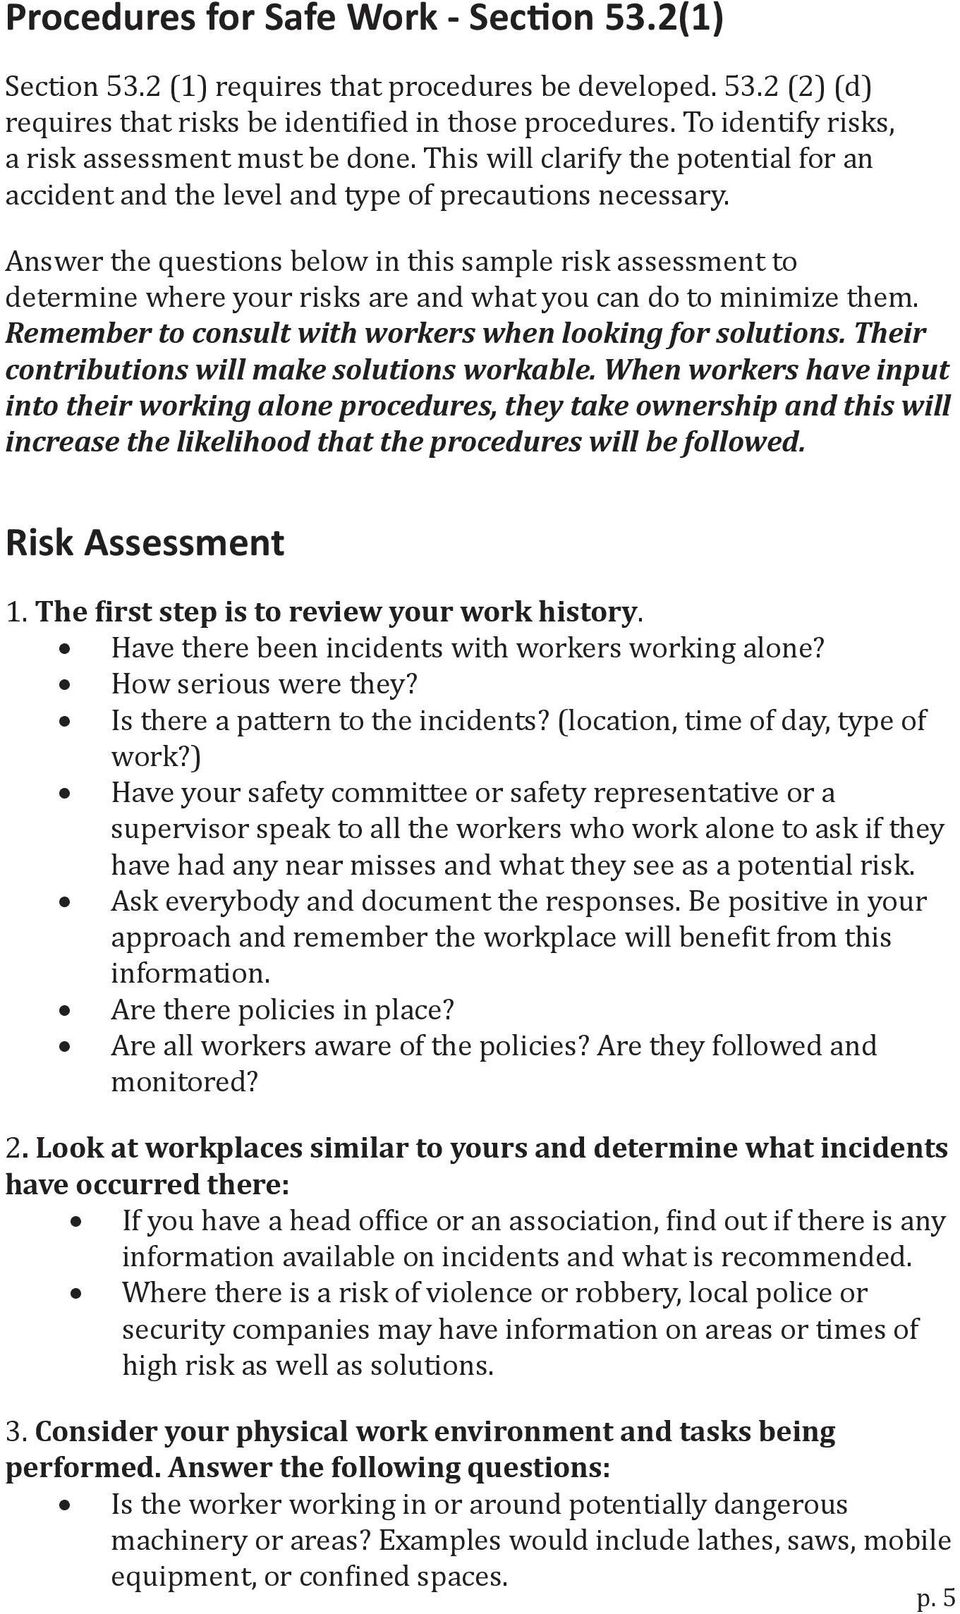 Answer the questions below in this sample risk assessment to determine where your risks are and what you can do to minimize them. Remember to consult with workers when looking for solutions.